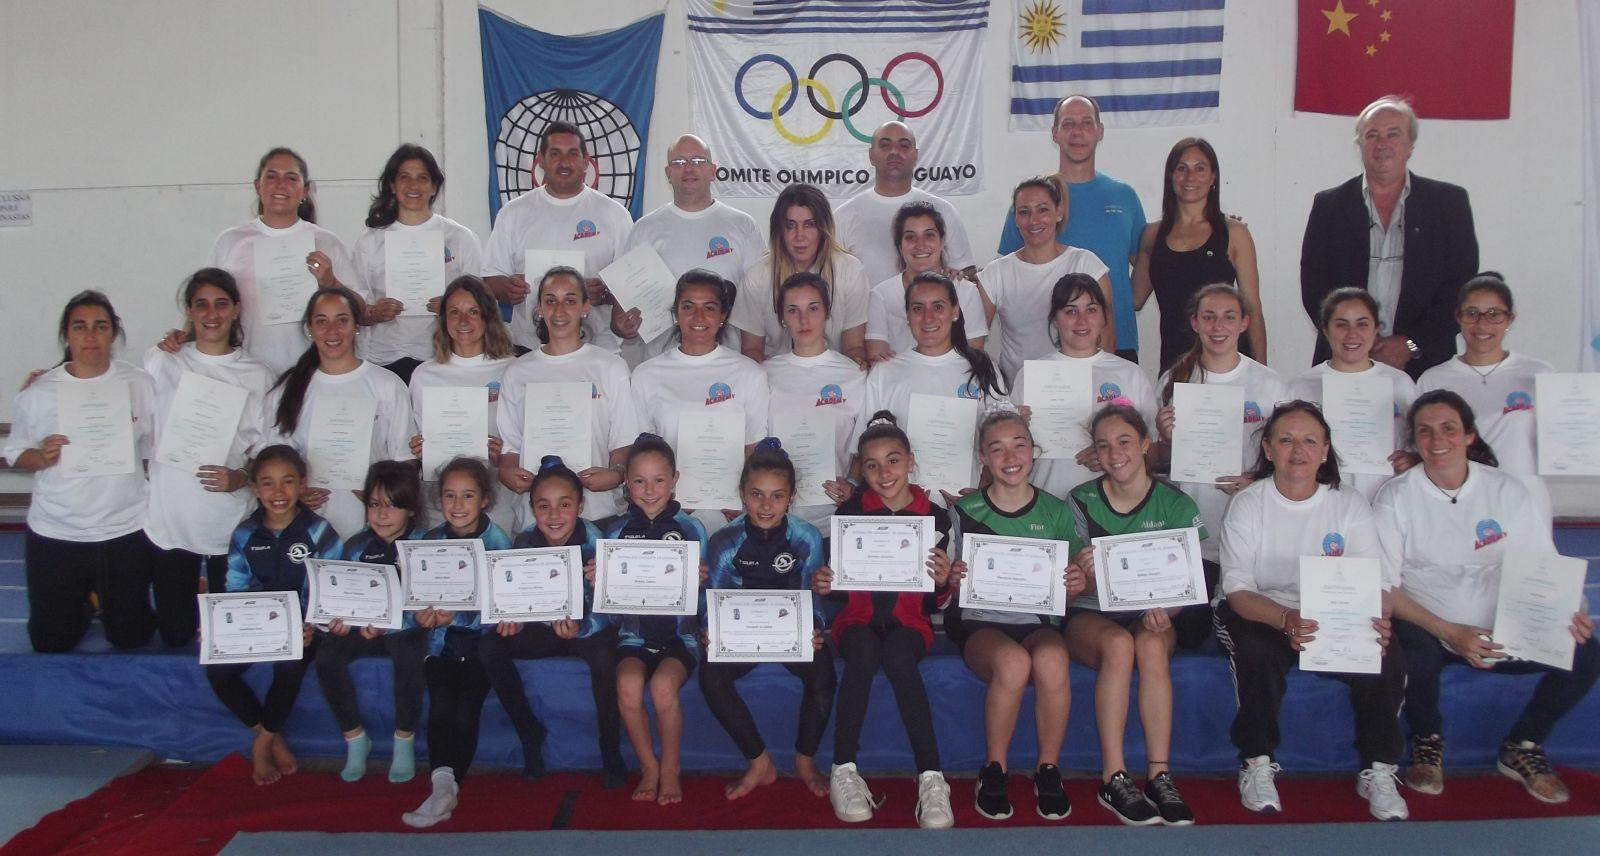 Twenty-four coaches took part in the course with young gymnasts involved in practical and theoretical sessions ©COU